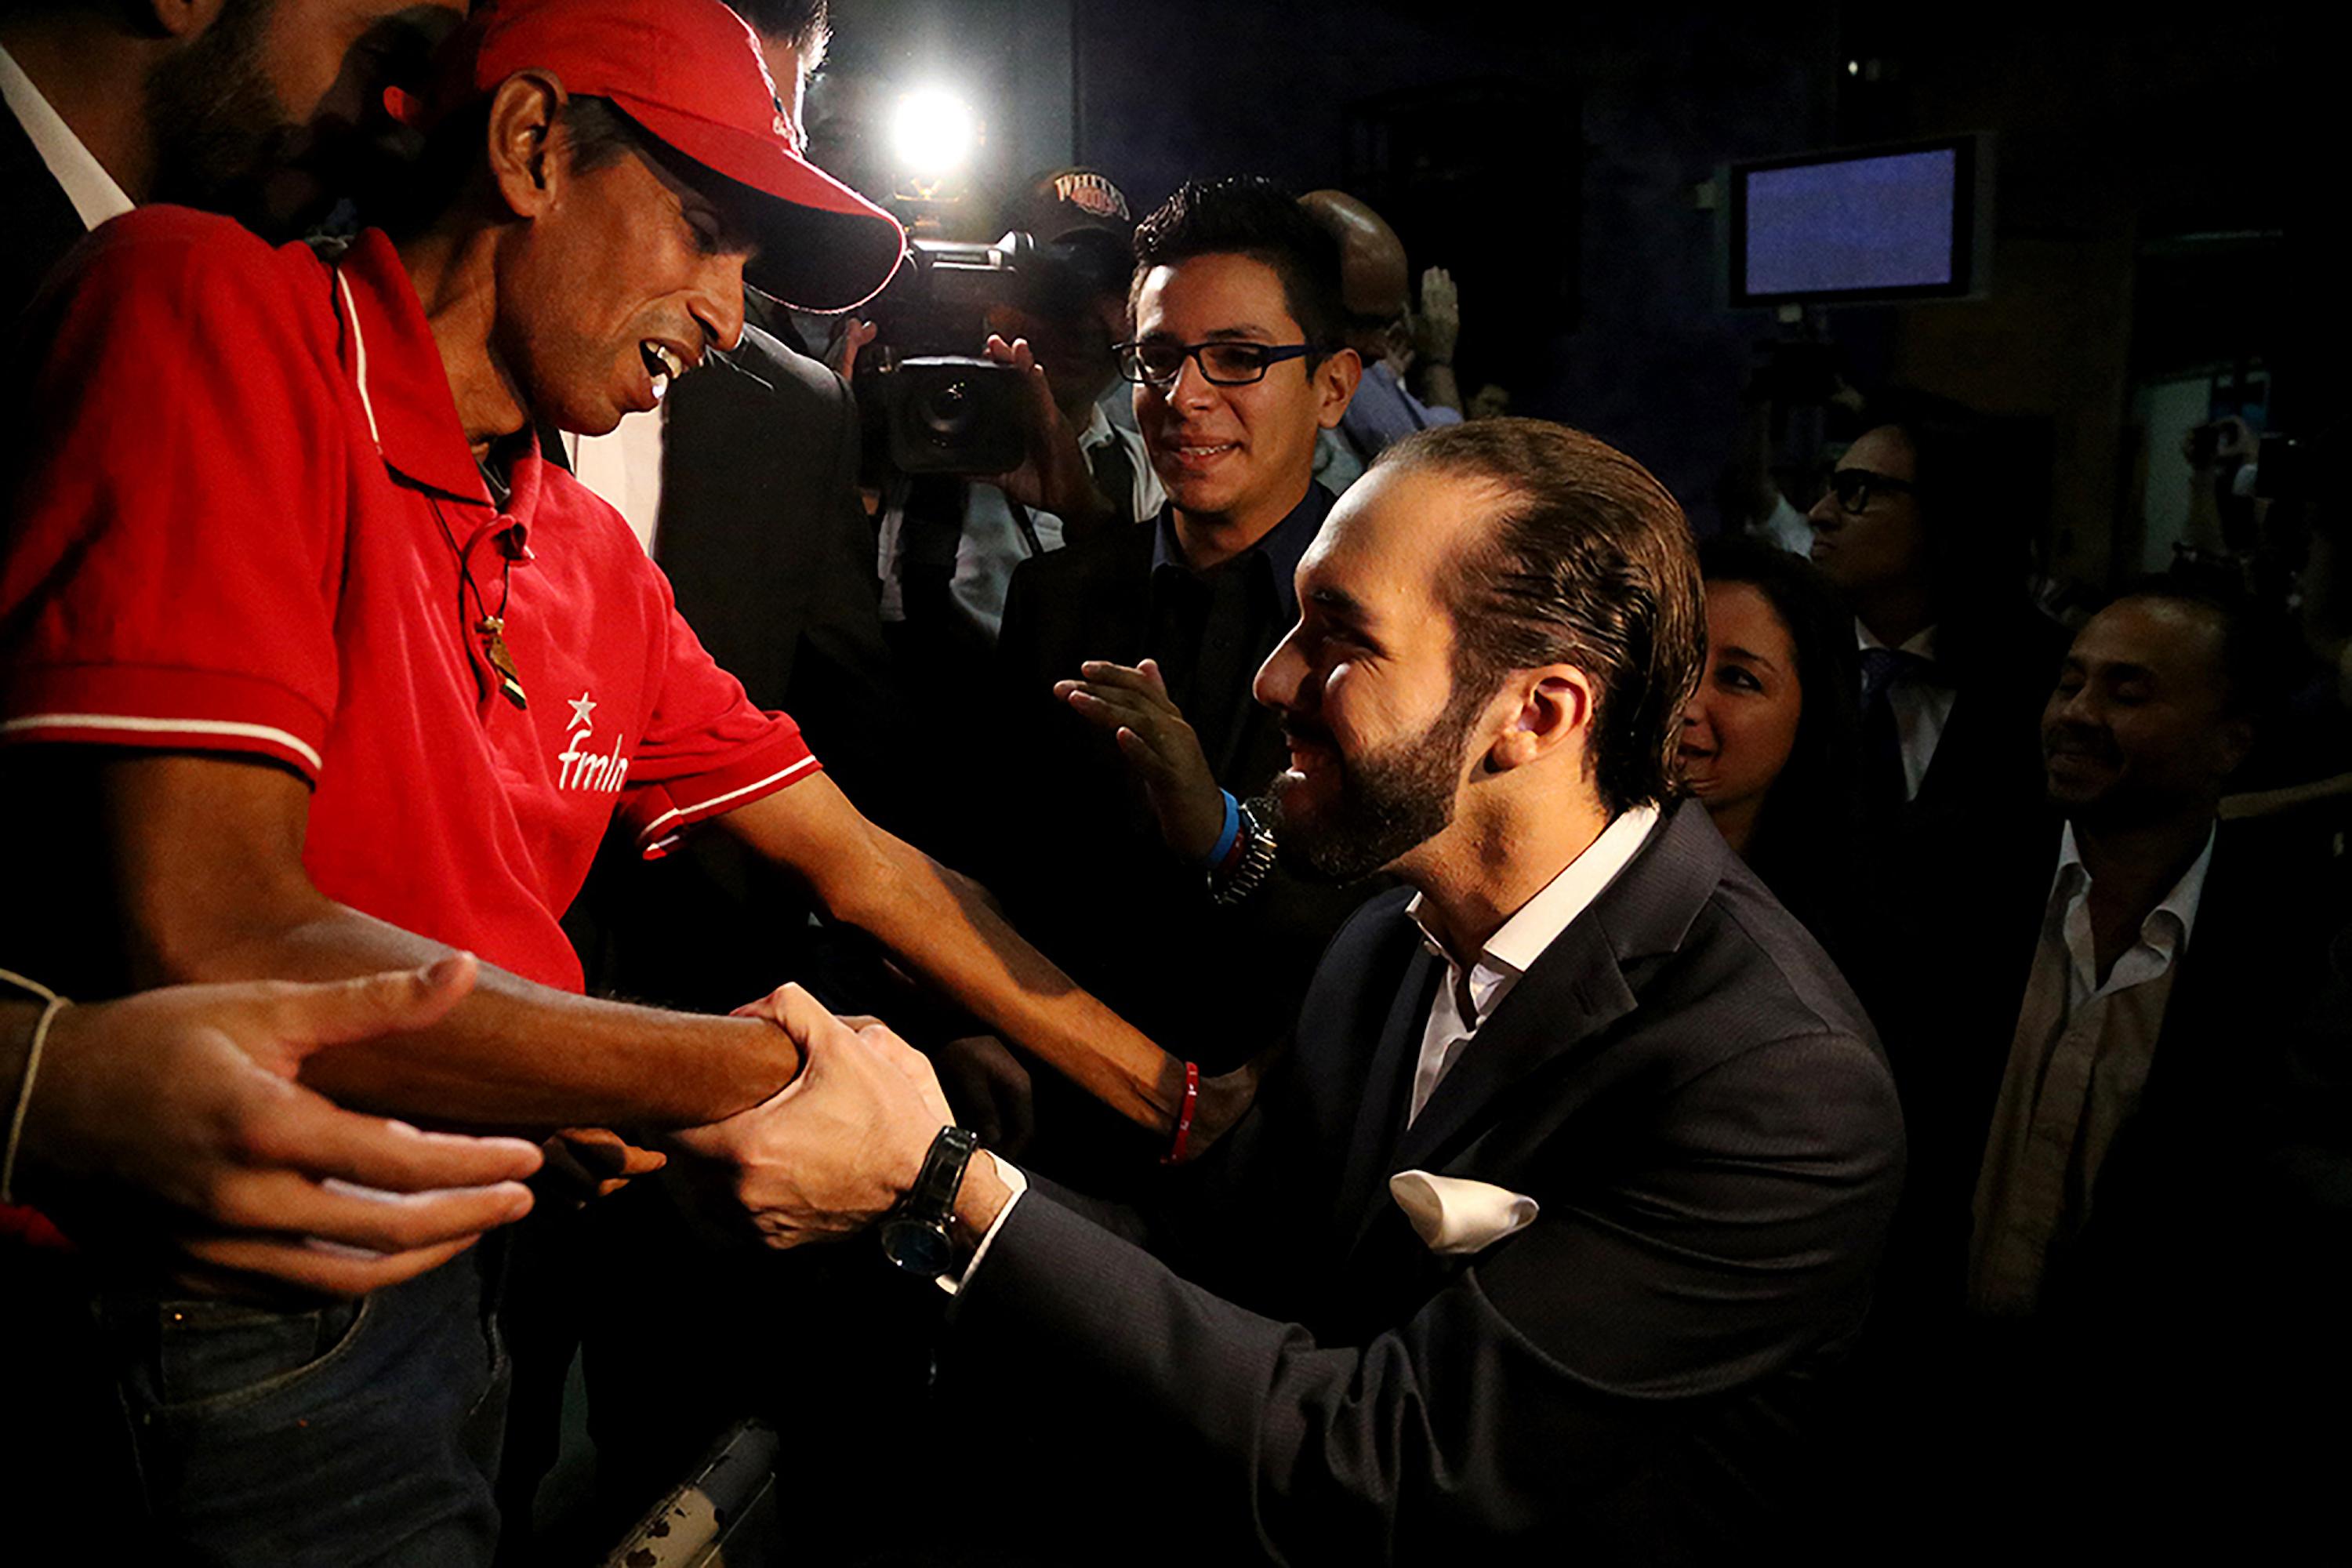 Nayib Bukele greets an FMLN party member at the end of an electoral debate during the San Salvador mayor's race in 2015. The FMLN and their star mayor repeatedly clashed in public from 2012 until his expulsion from the party five years later. Photo: Fred Ramos/El Faro